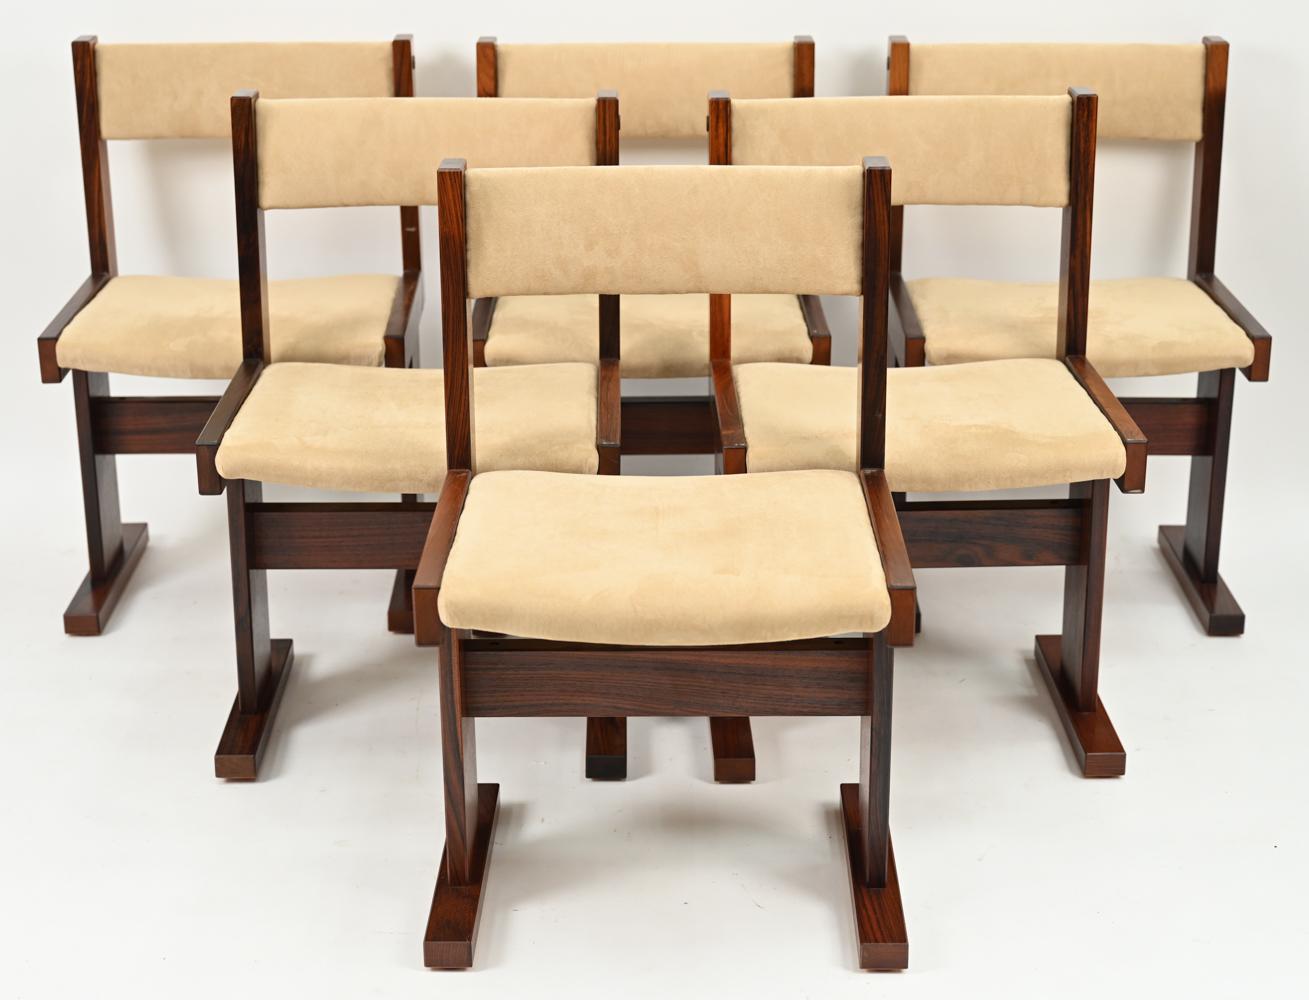 A beautiful set of (6) Scandinavian Modern dining chairs designed by Poul H. Poulsen for Gangso Mobler, c. 1970's. These gorgeous rosewood chairs pair perfectly with his Ox Art design tables and mirror their trestle-style bases with sturdy